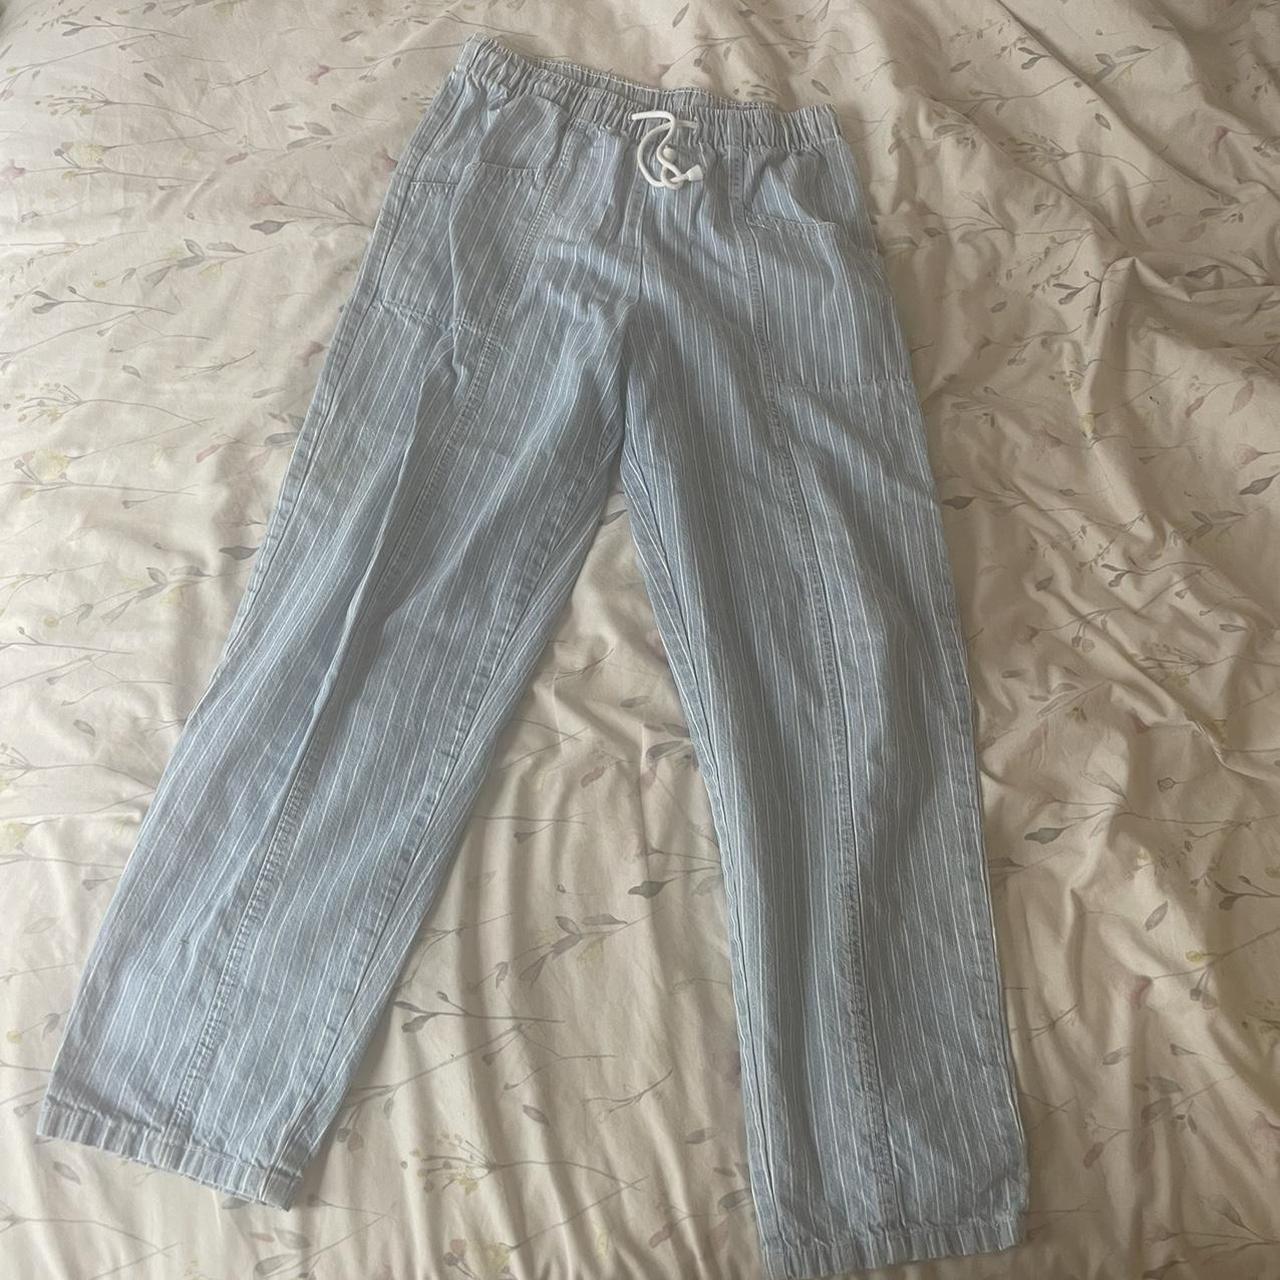 Stockholm style striped cotton trousers- such good... - Depop